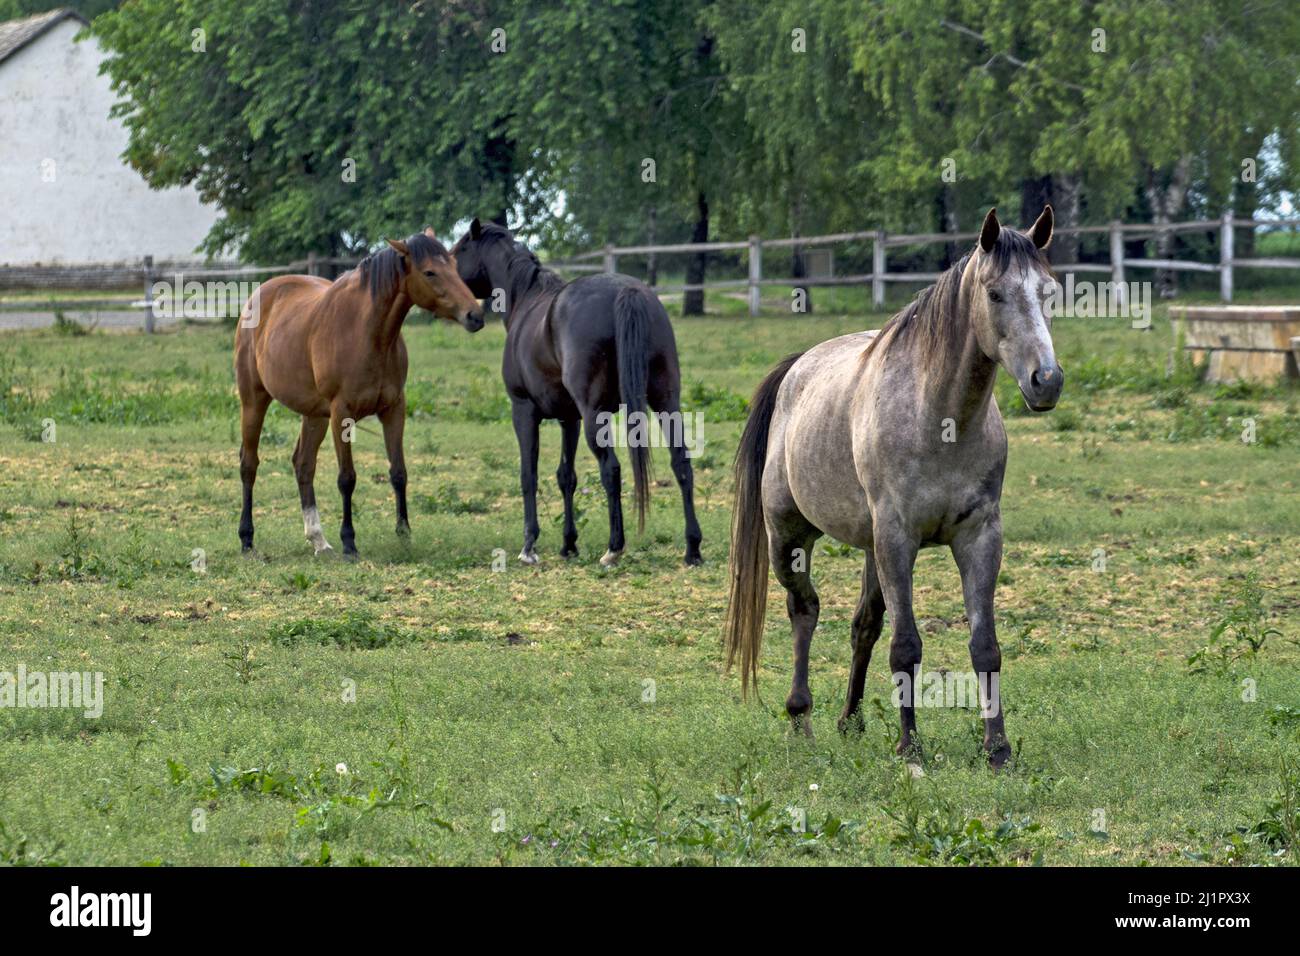 A group of young horses in a green field on a sunny day Stock Photo